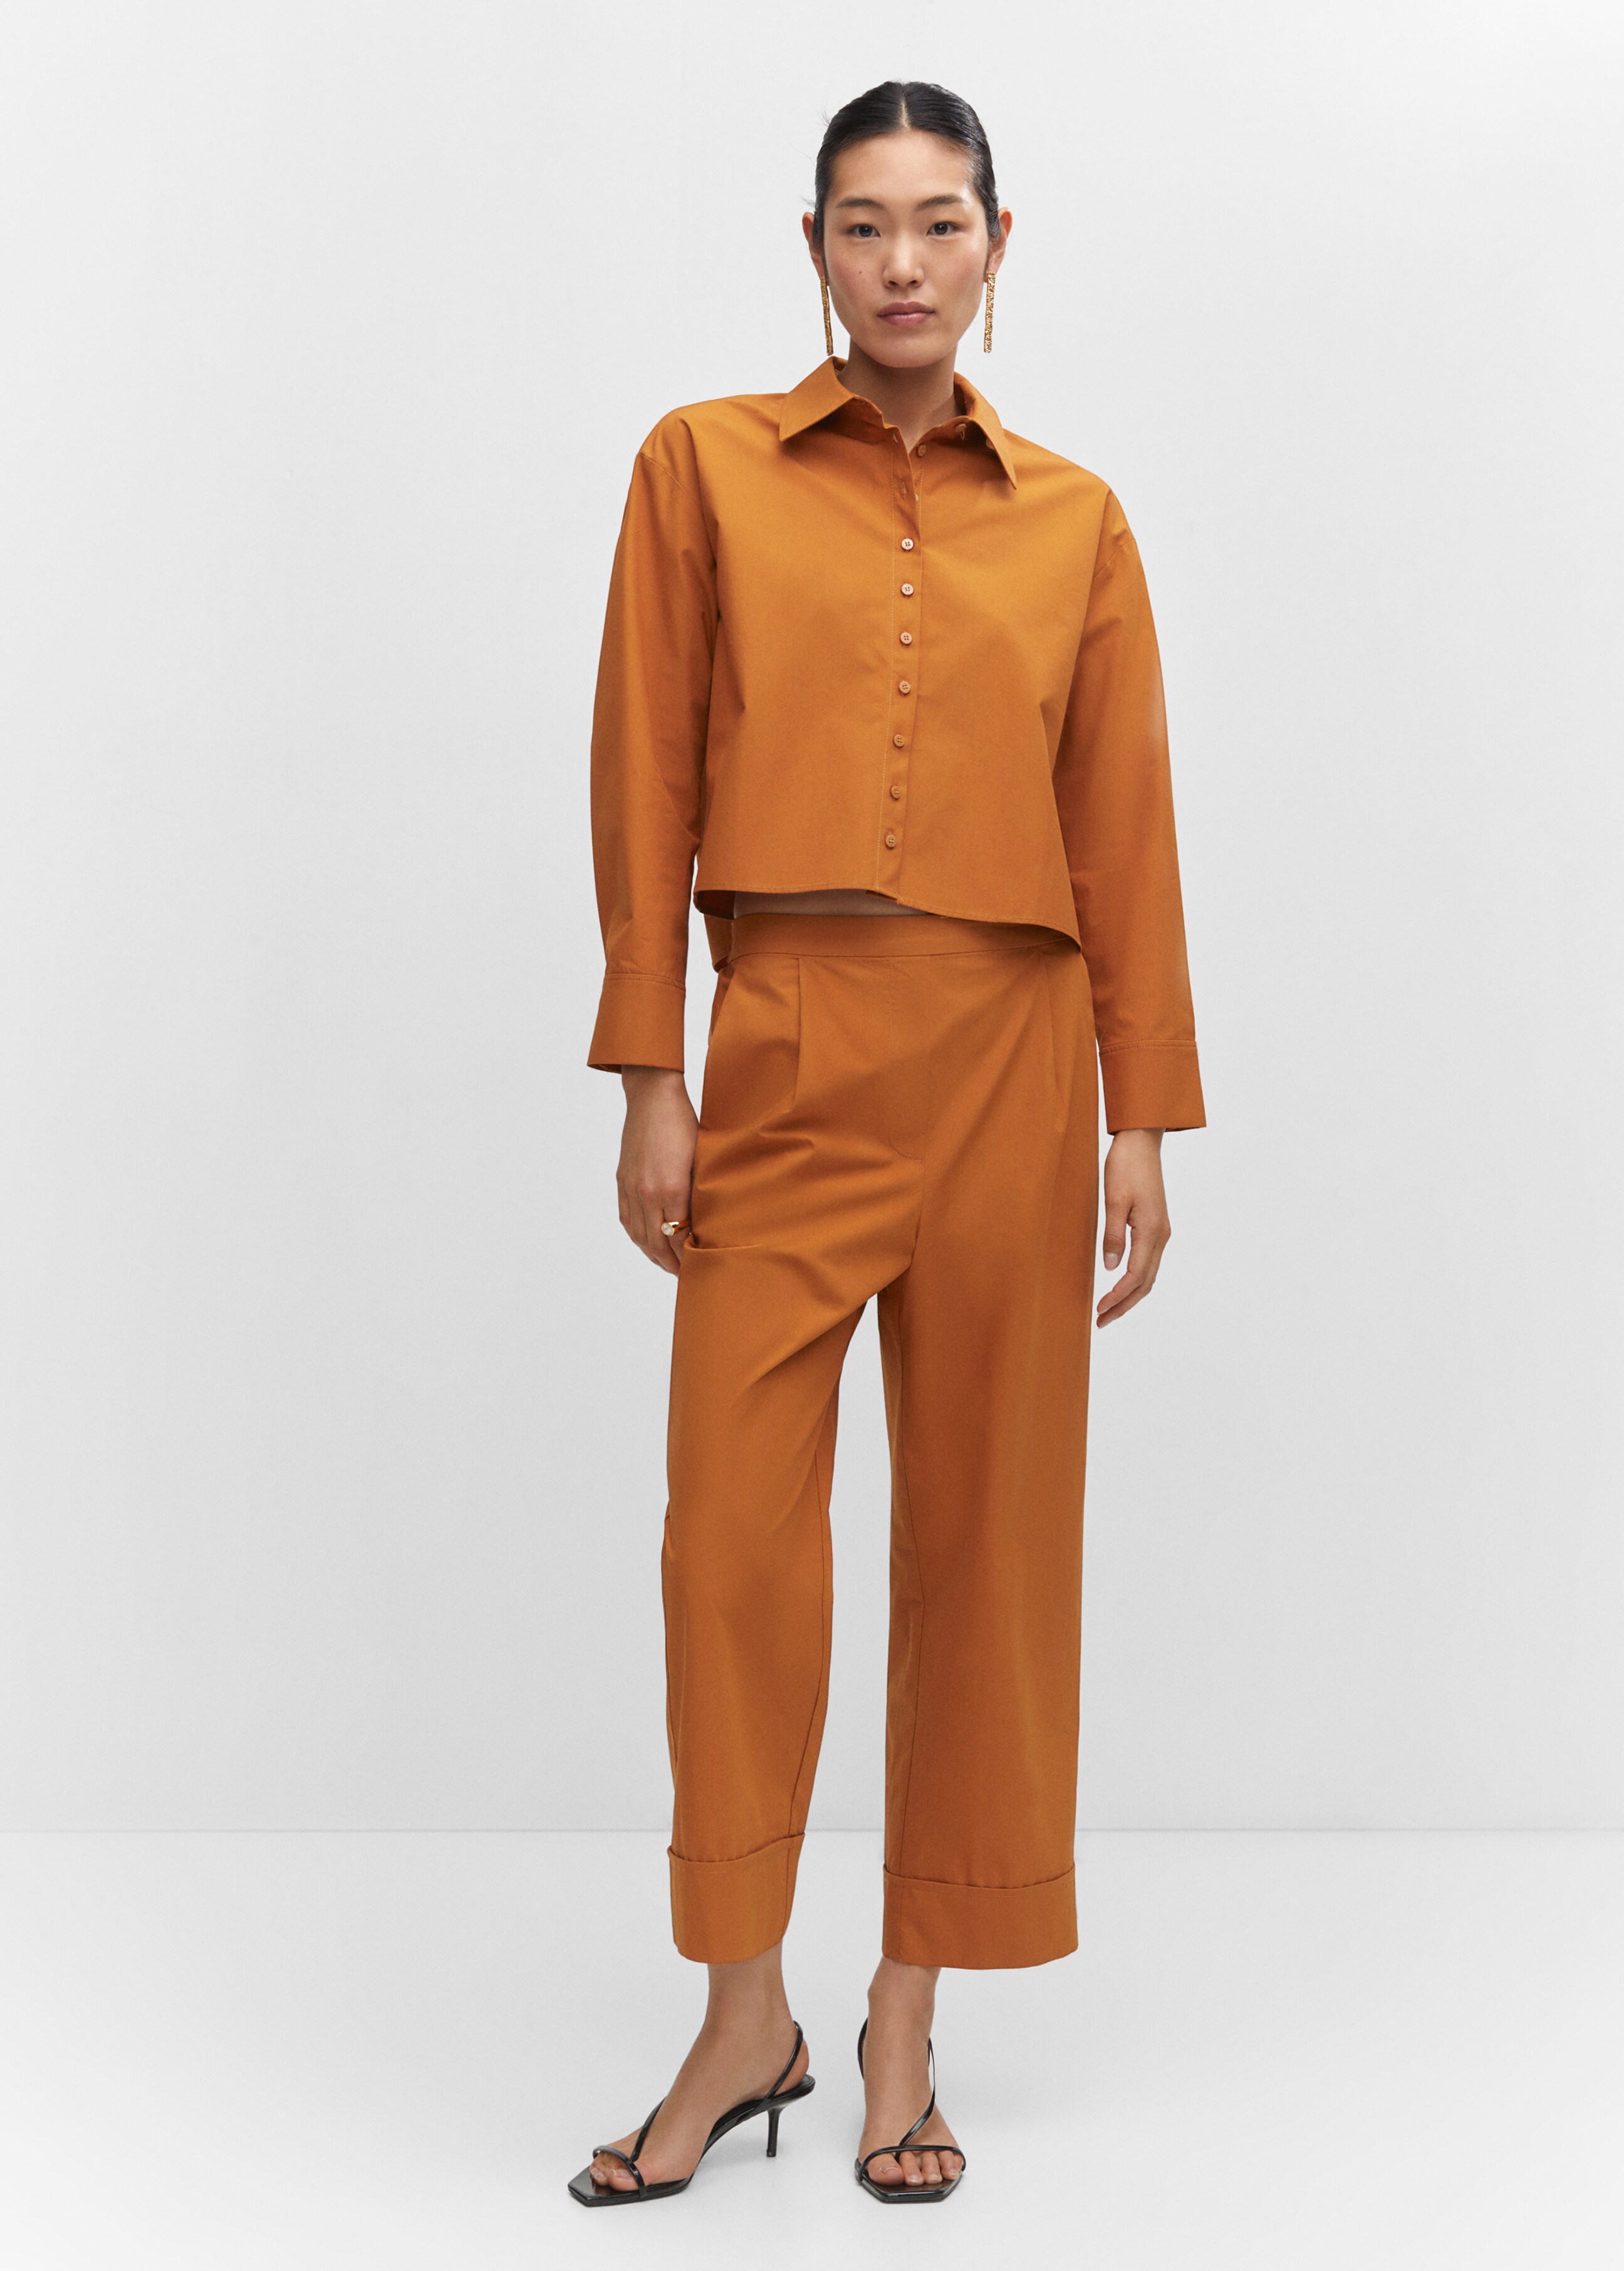 Pleated culottes trousers - General plane